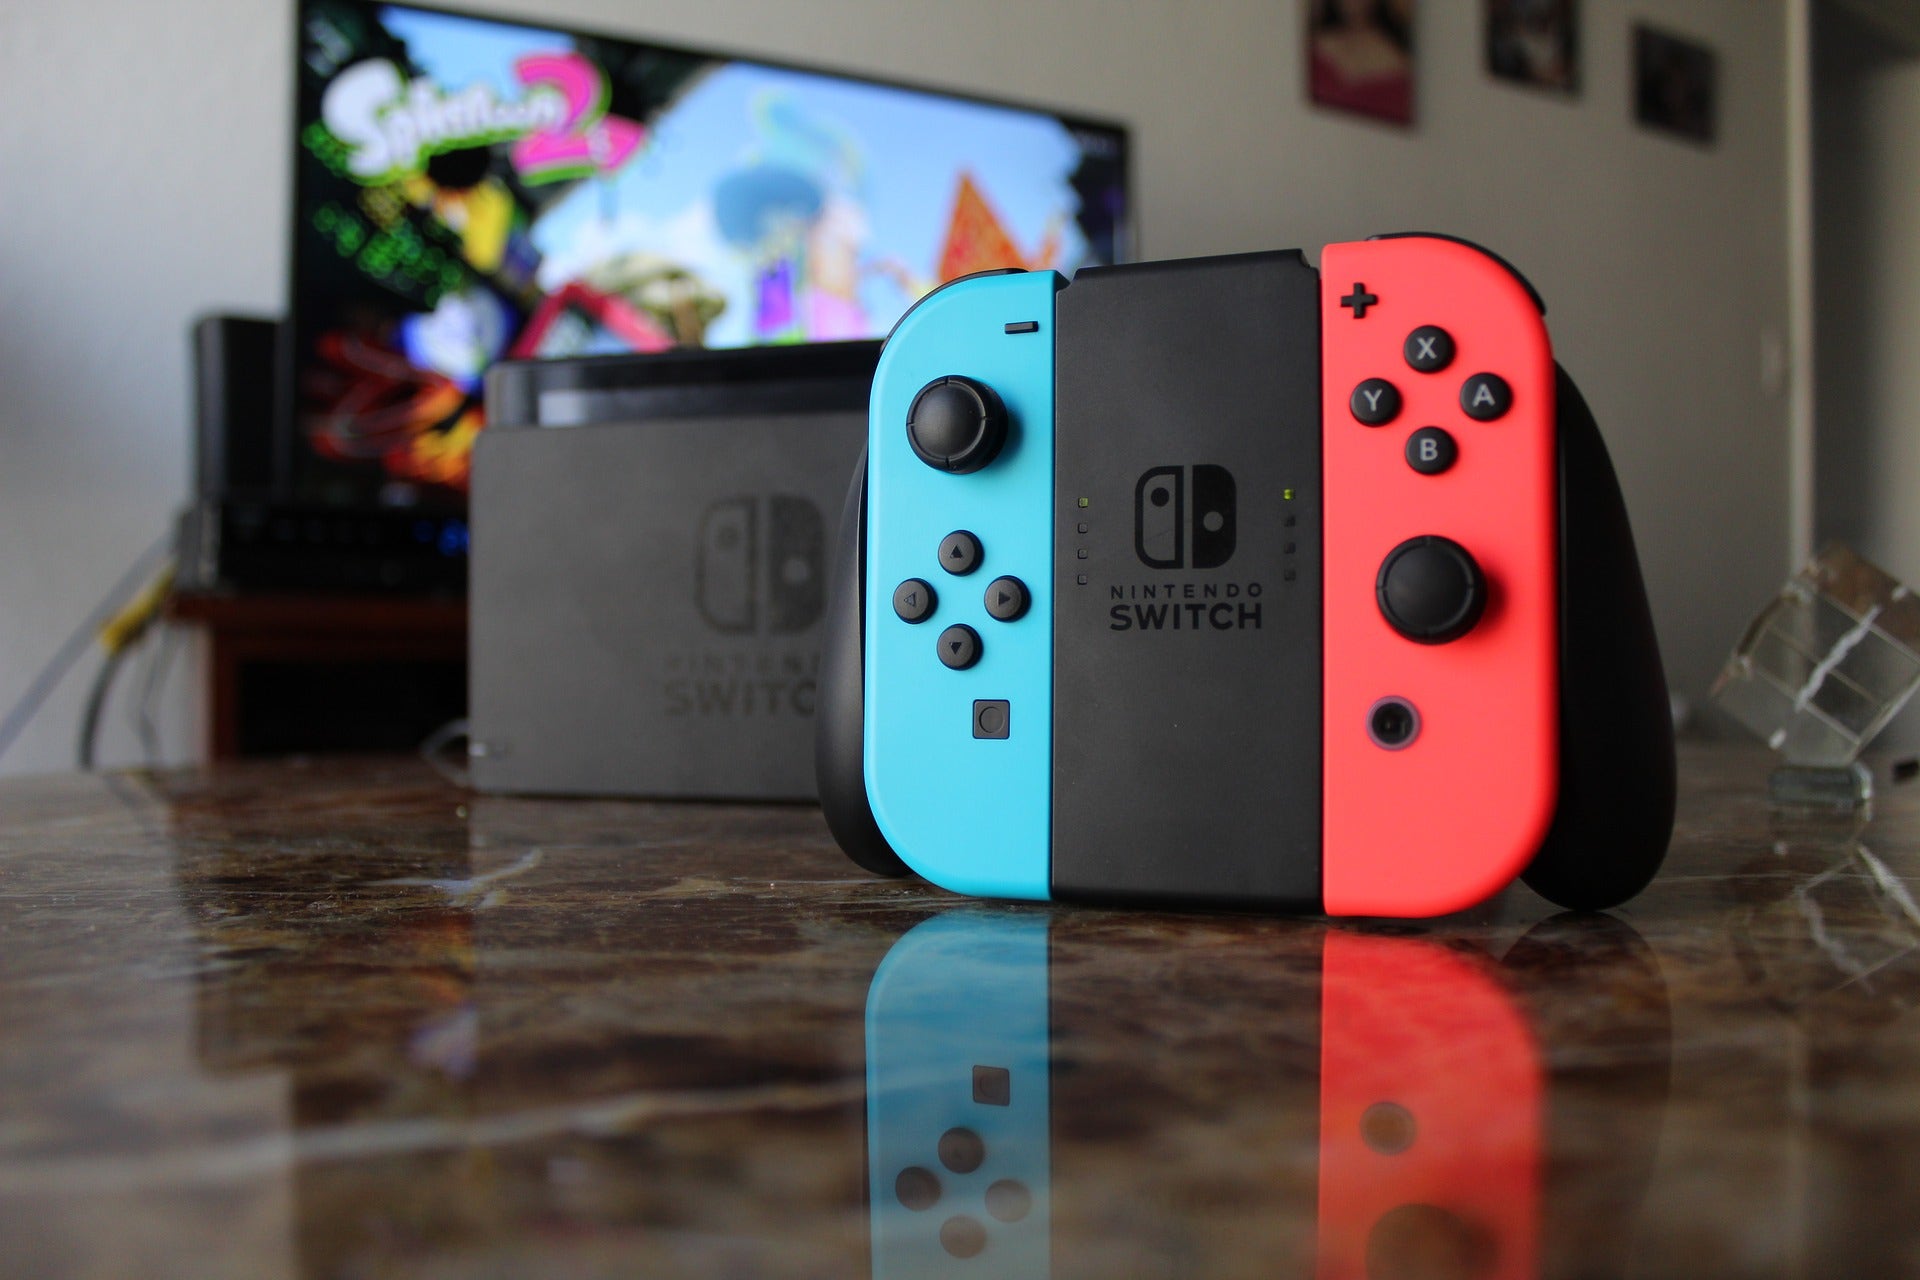 Nintendo Expects To Sell 26% More Switch Consoles In 2021 Over Previous Estimate